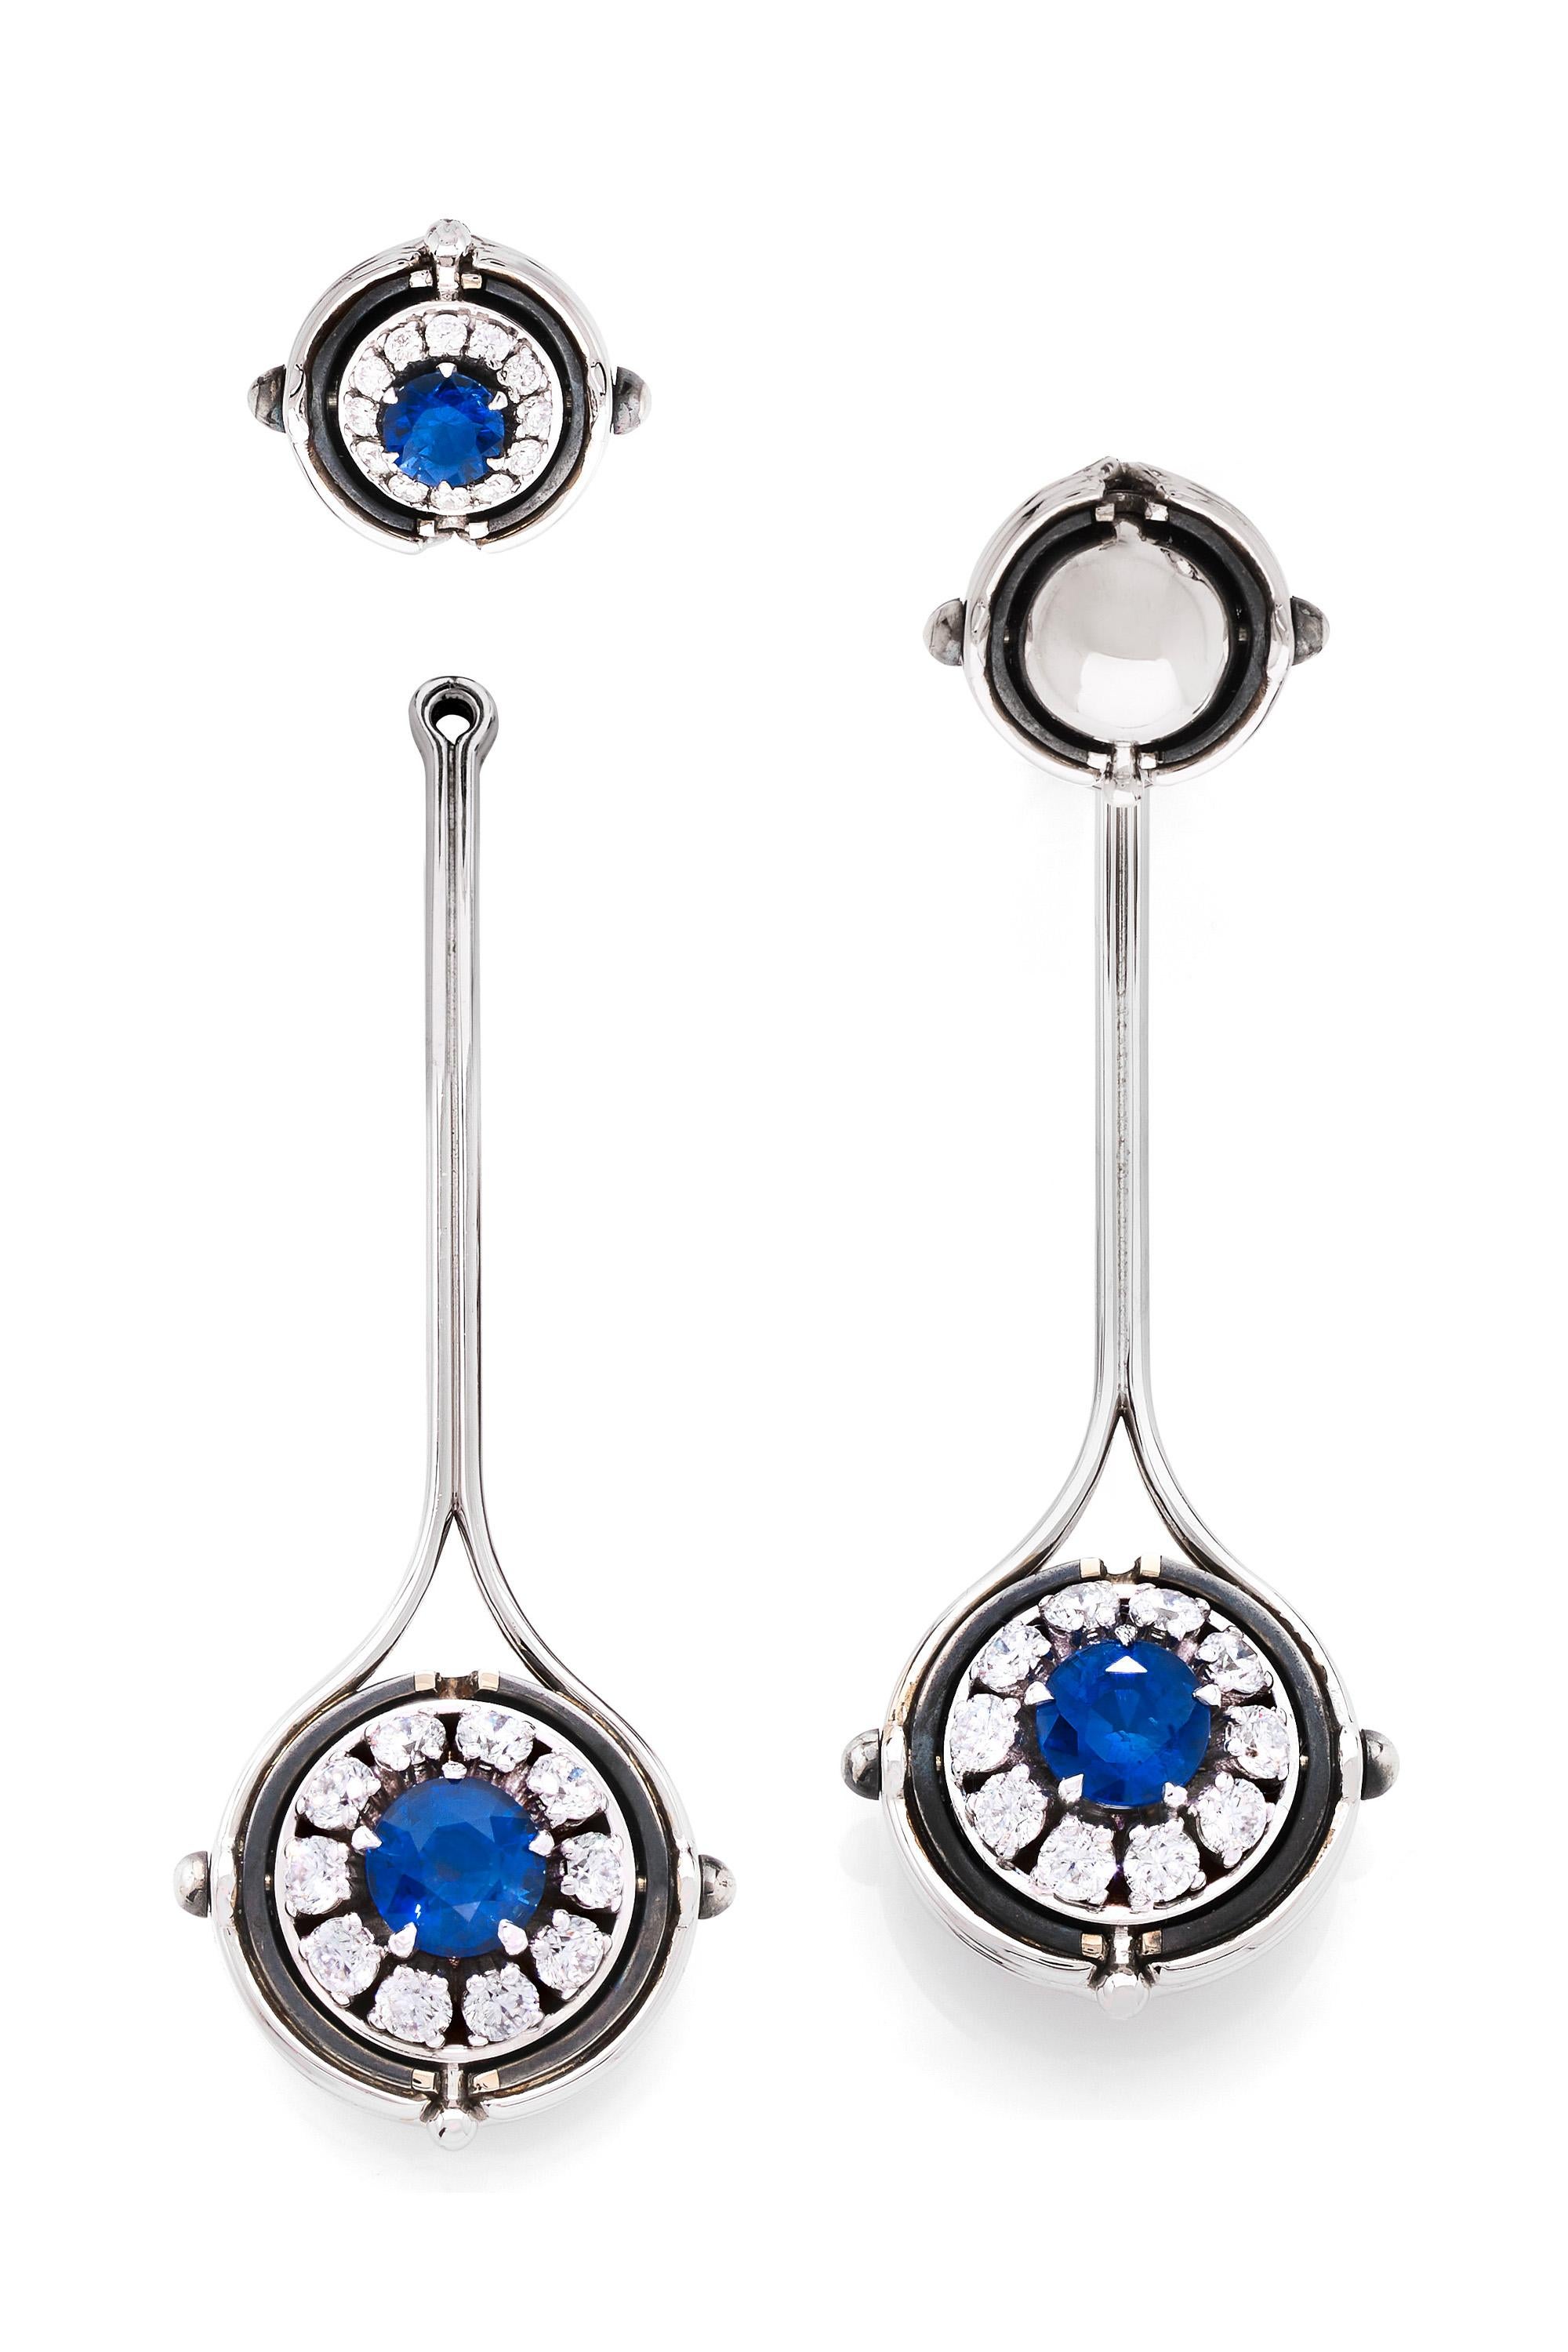 White gold and distressed silver earrings. Rotating spheres revealing a sapphire surrounded by diamonds.

The pendants and the studs can be sold separately.

Details : 
4 Sapphires: 2.53 cts
32 Diamonds: 1.51 cts
18k White Gold: 23 g
Distressed